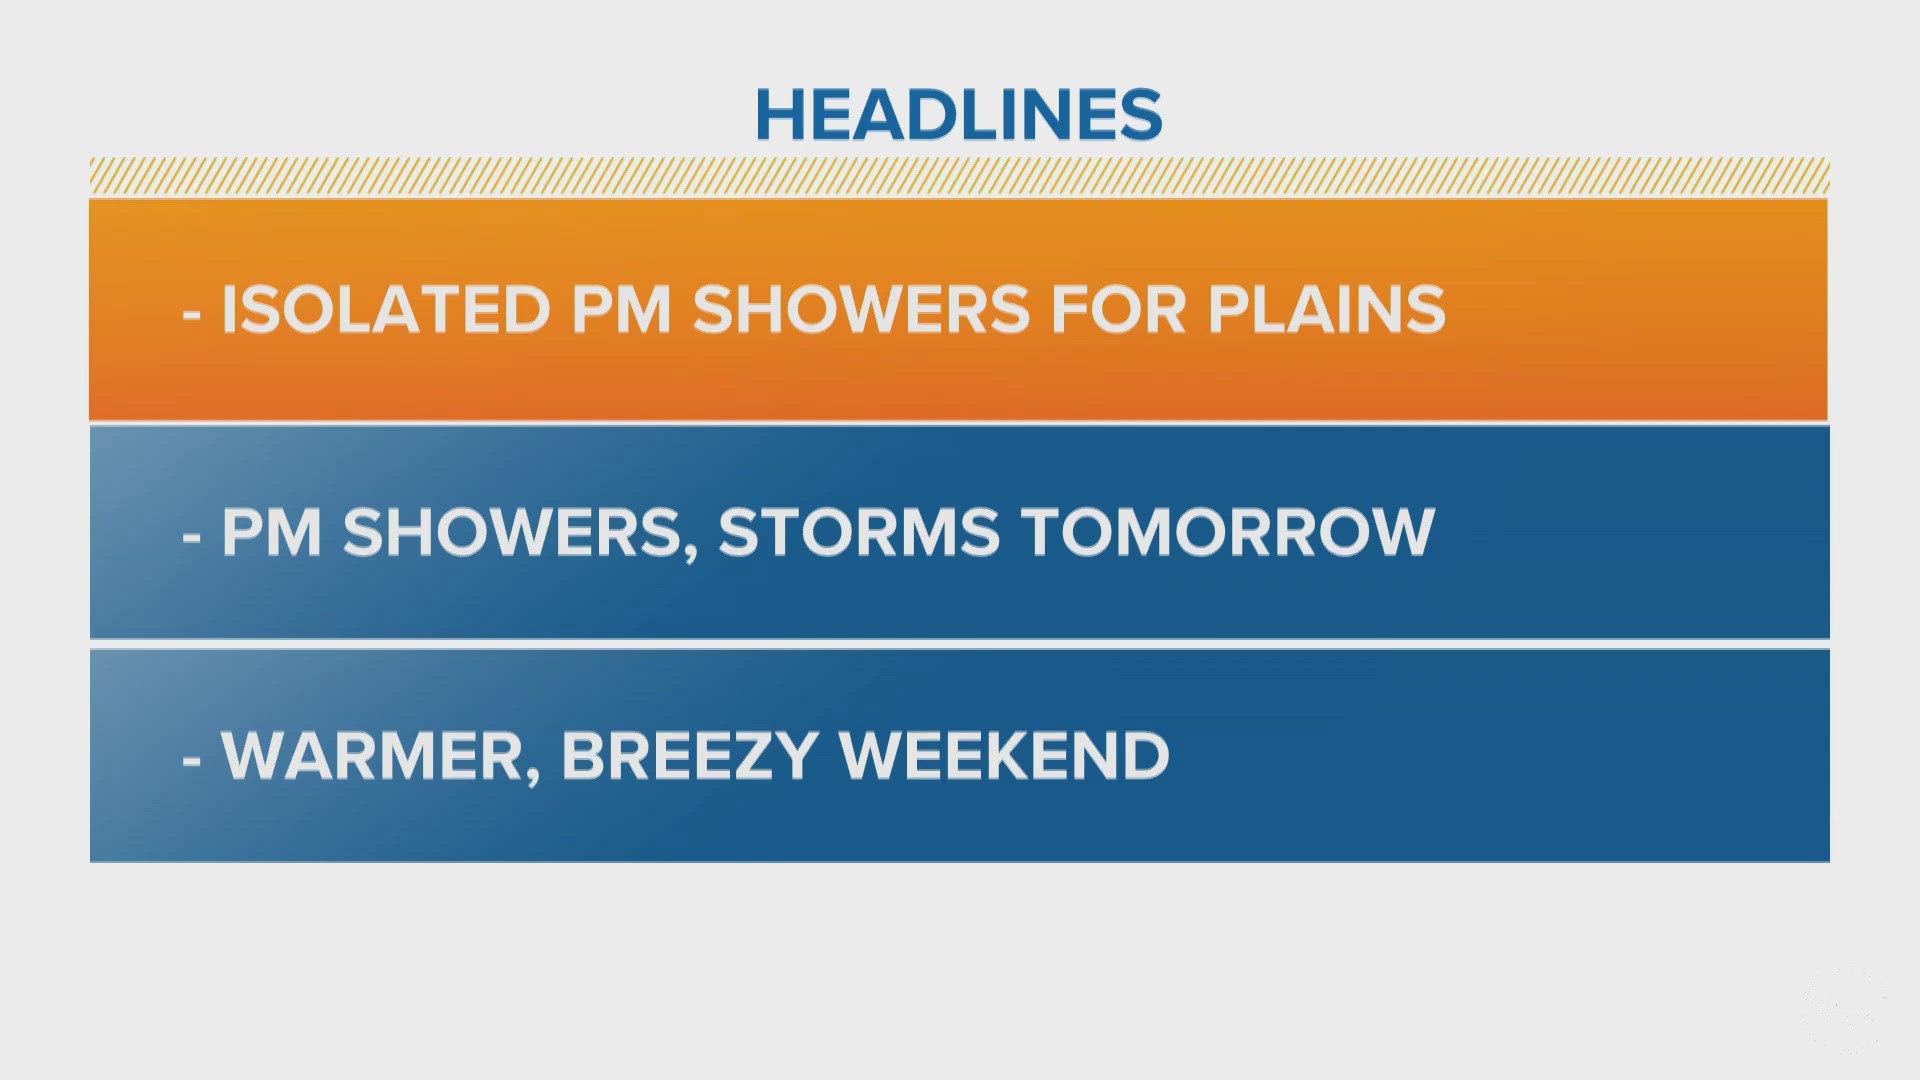 Denver will be cooler and breezy on Thursday with only a slight chance for an evening rain shower or storm.